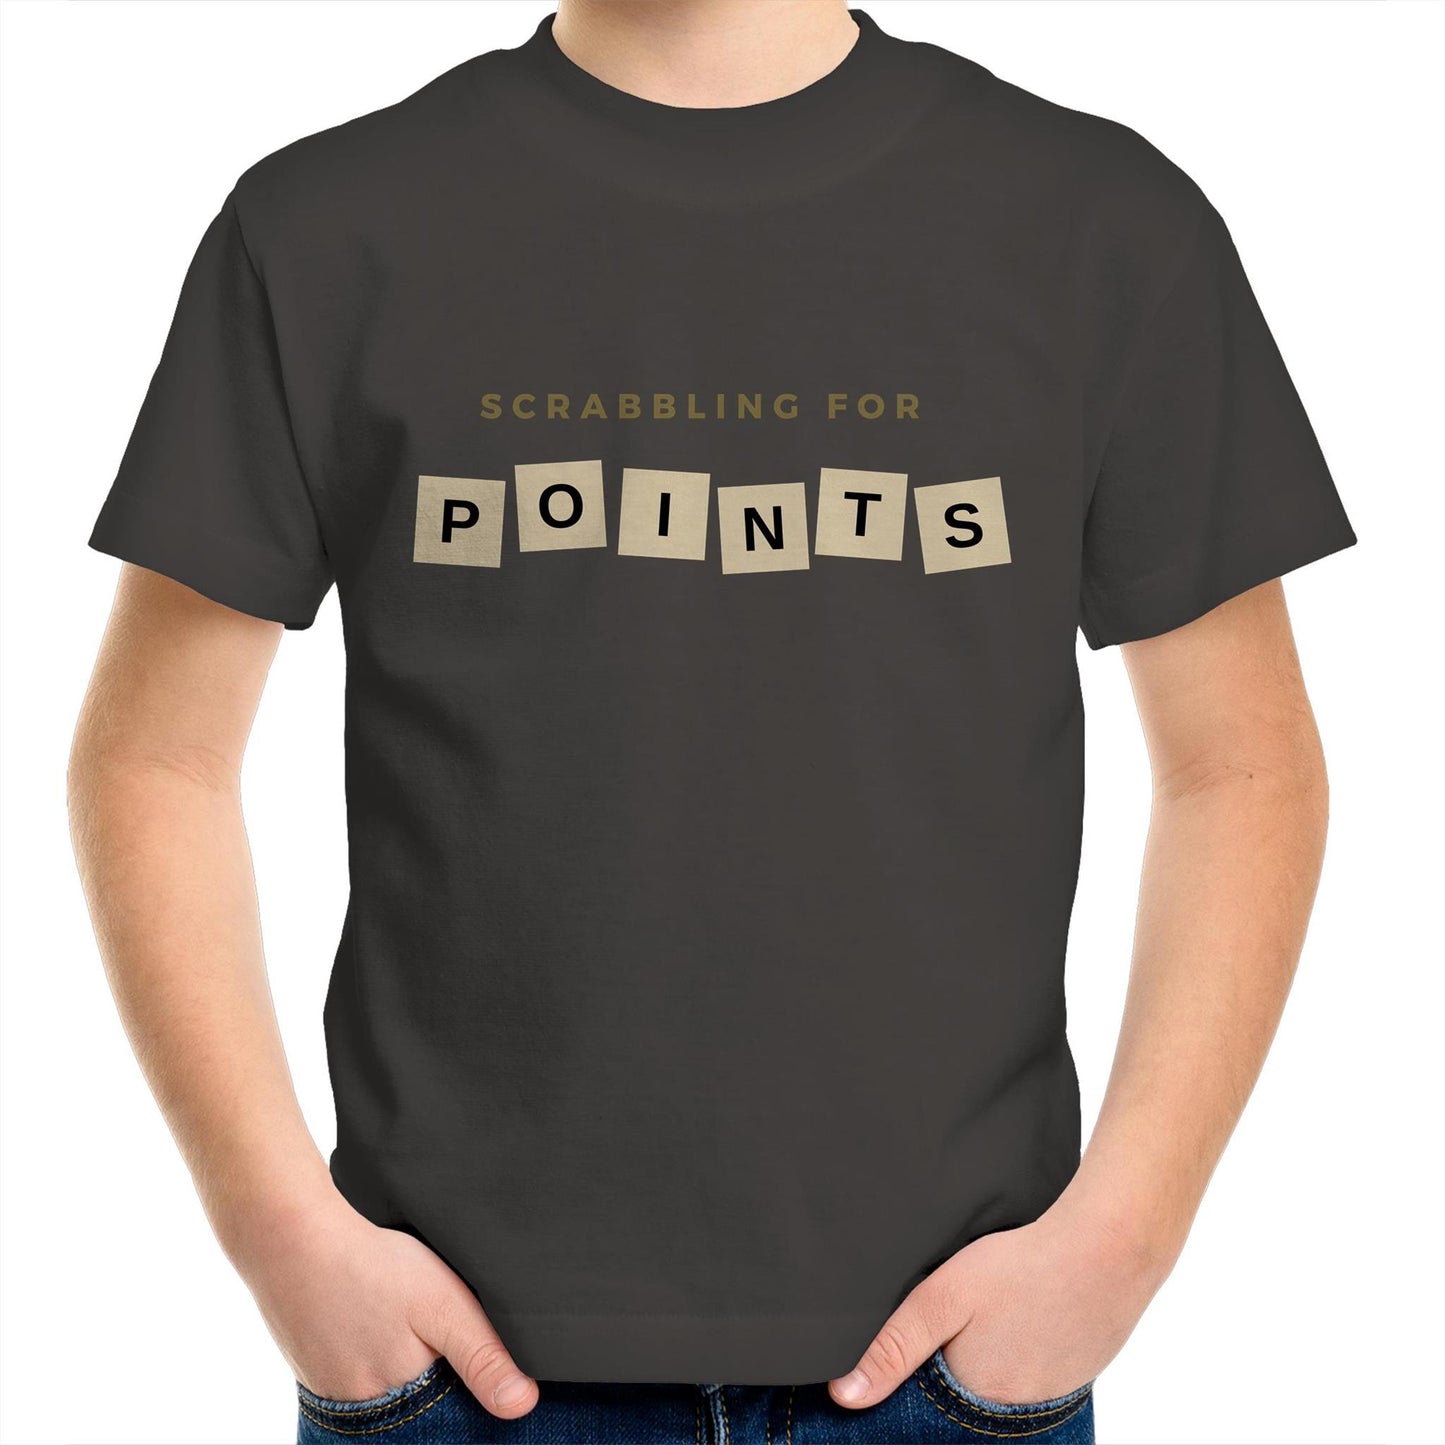 Scrabbling For Points - Kids Youth Crew T-Shirt Charcoal Kids Youth T-shirt Games